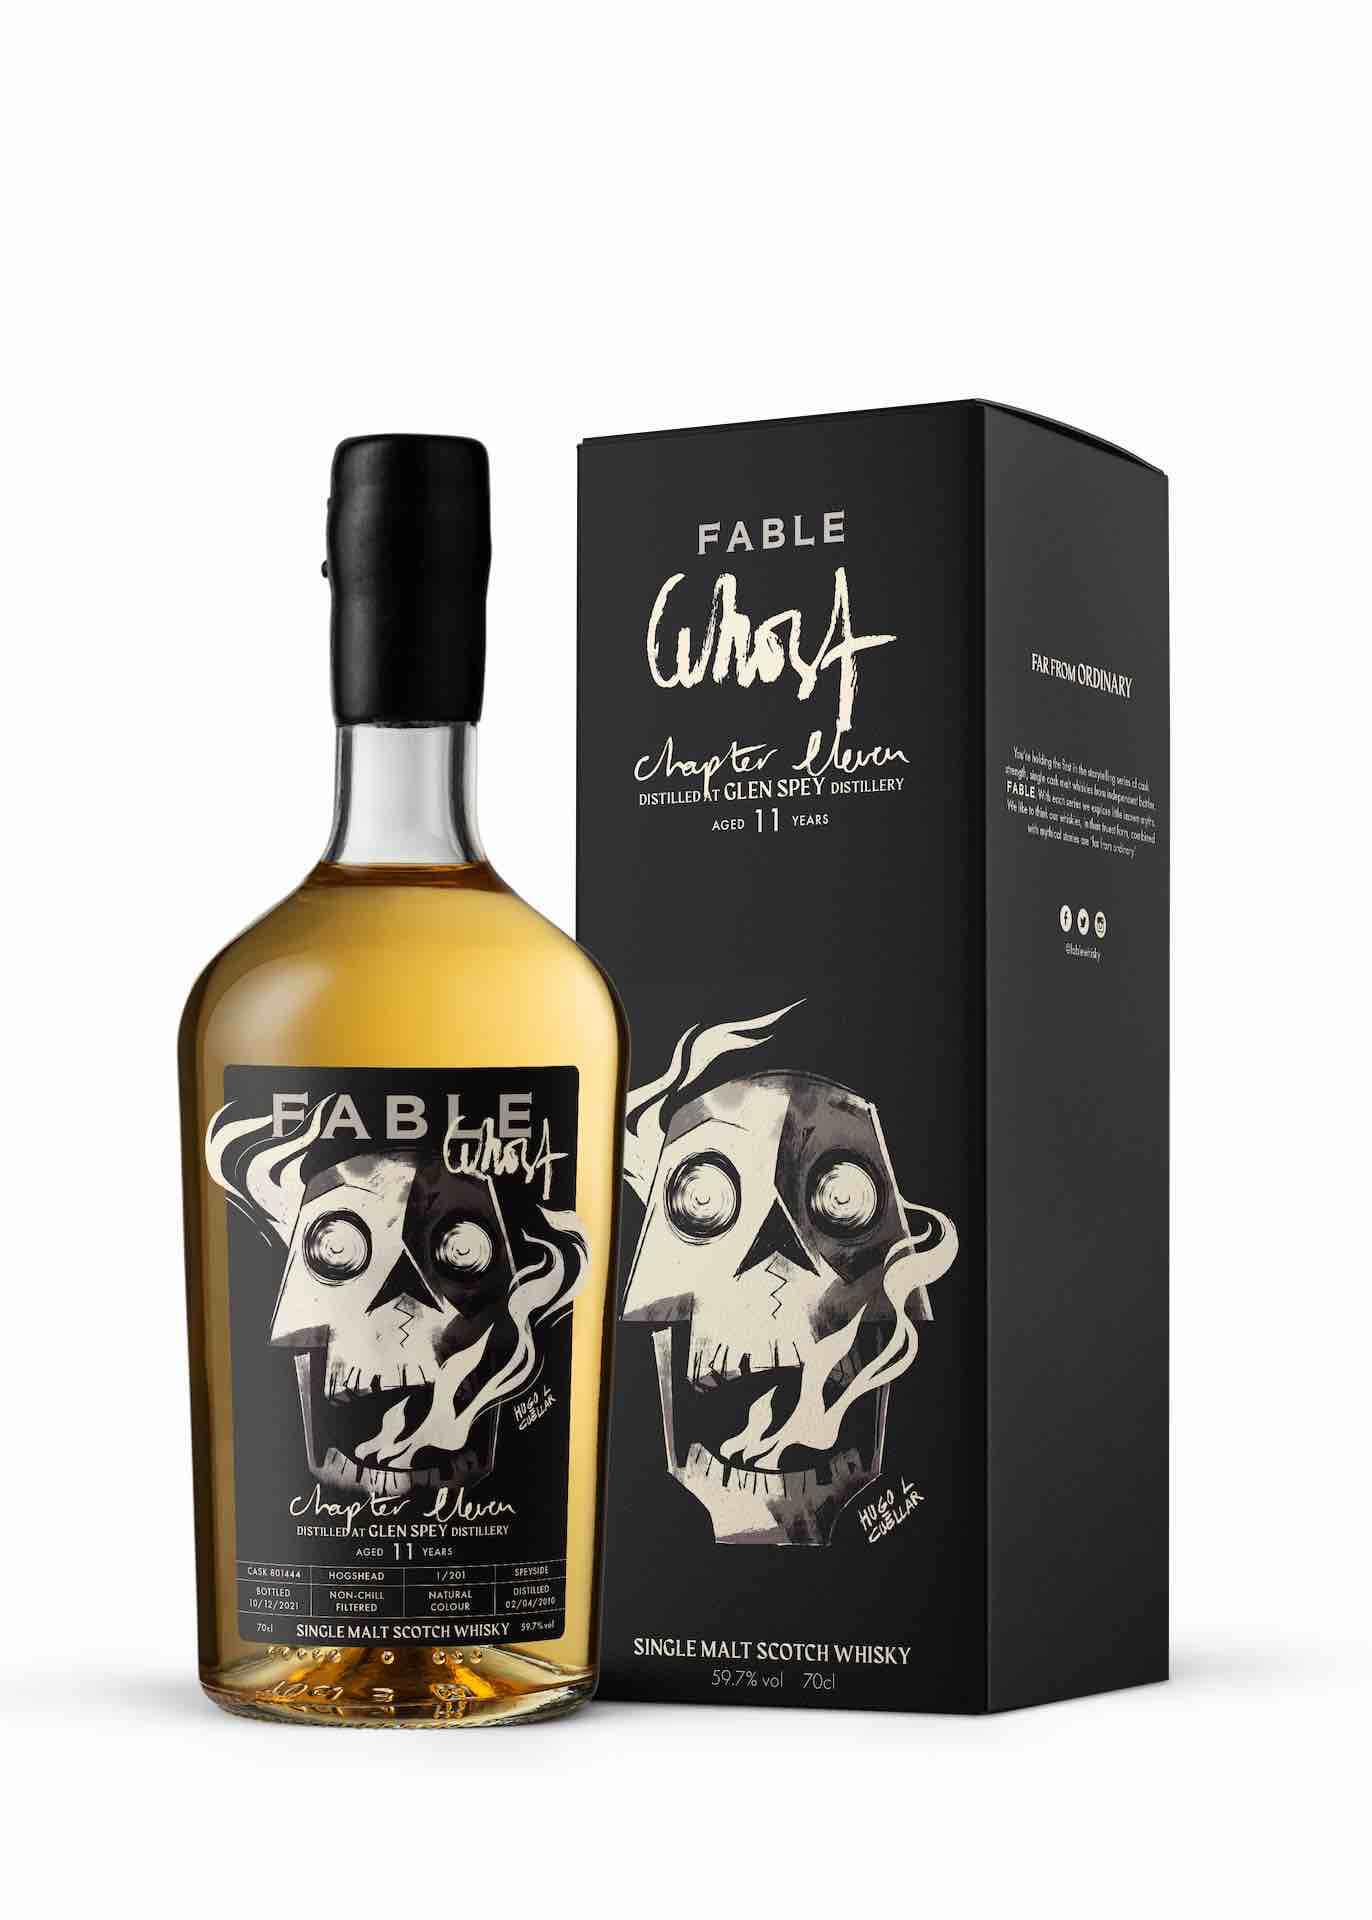 Fable Whisky Glen Spey 11 Year Old